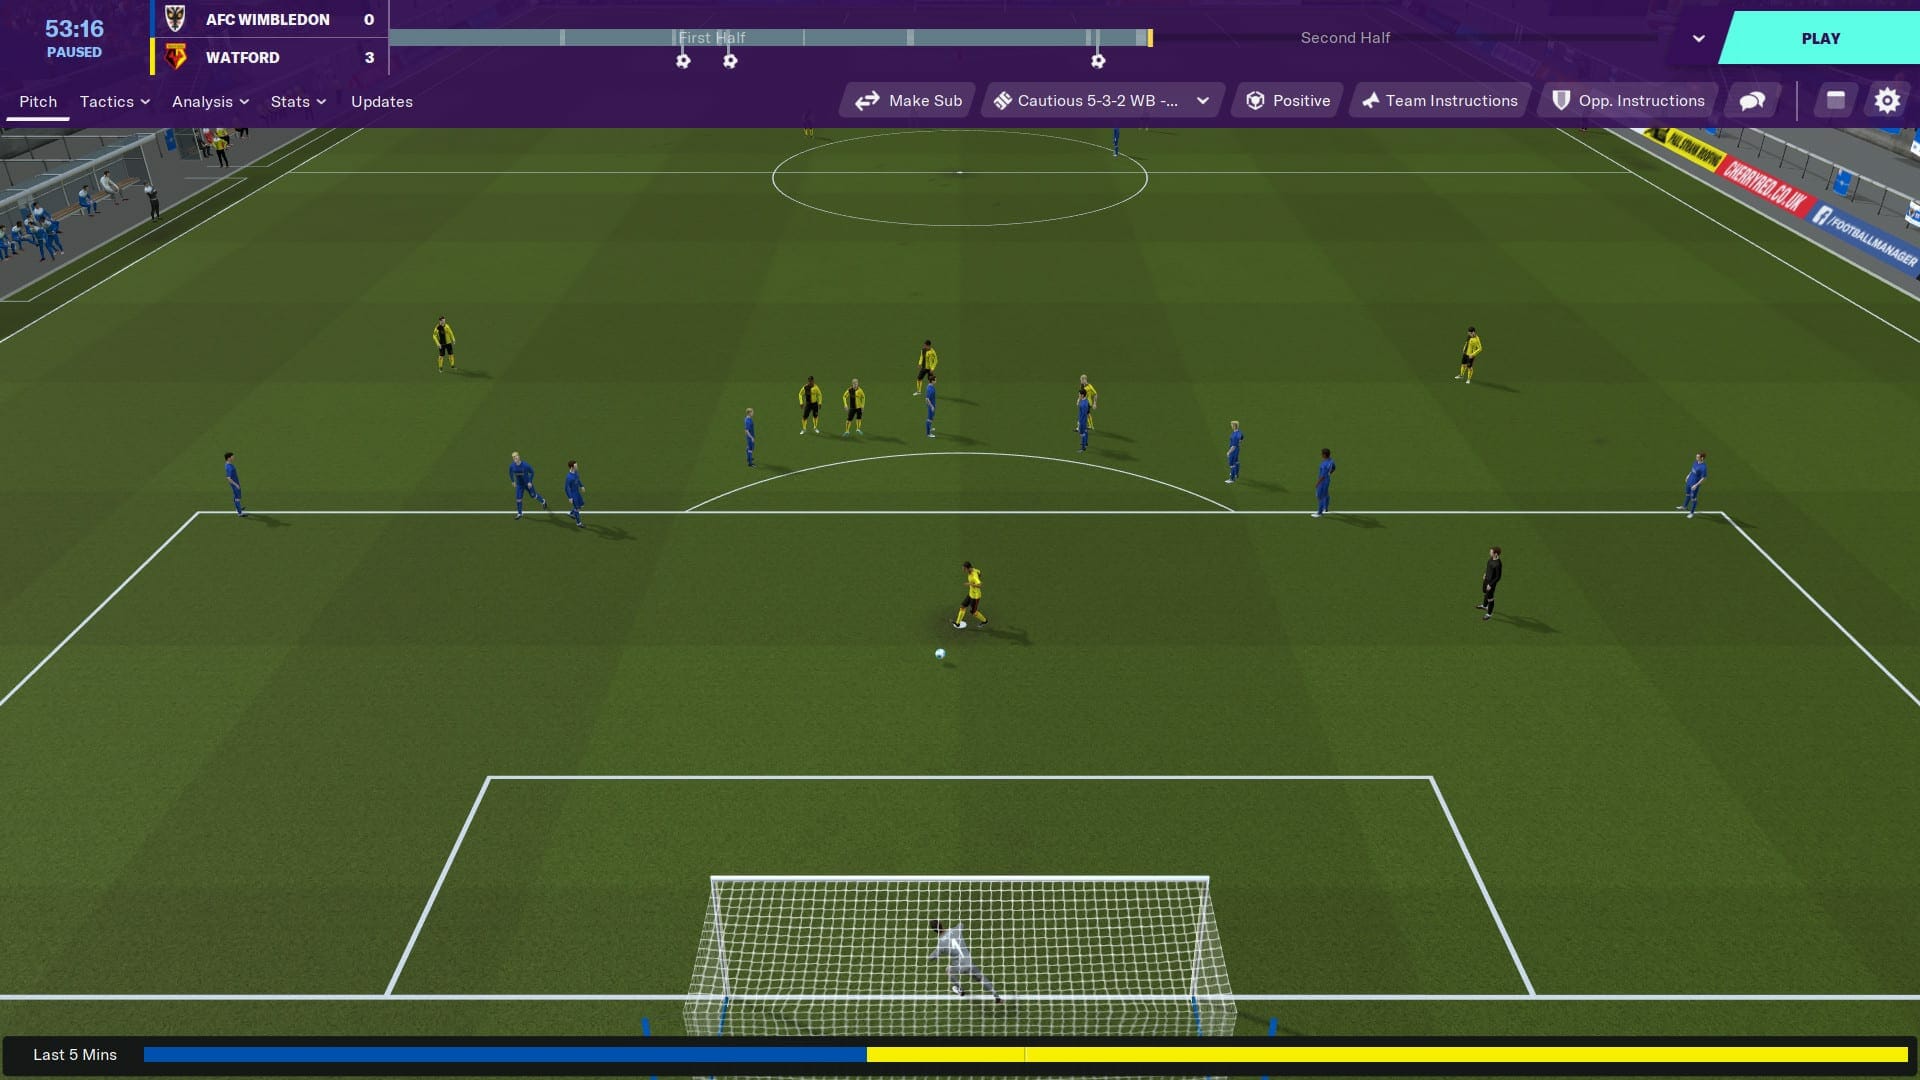 download football manager 2018 google drive